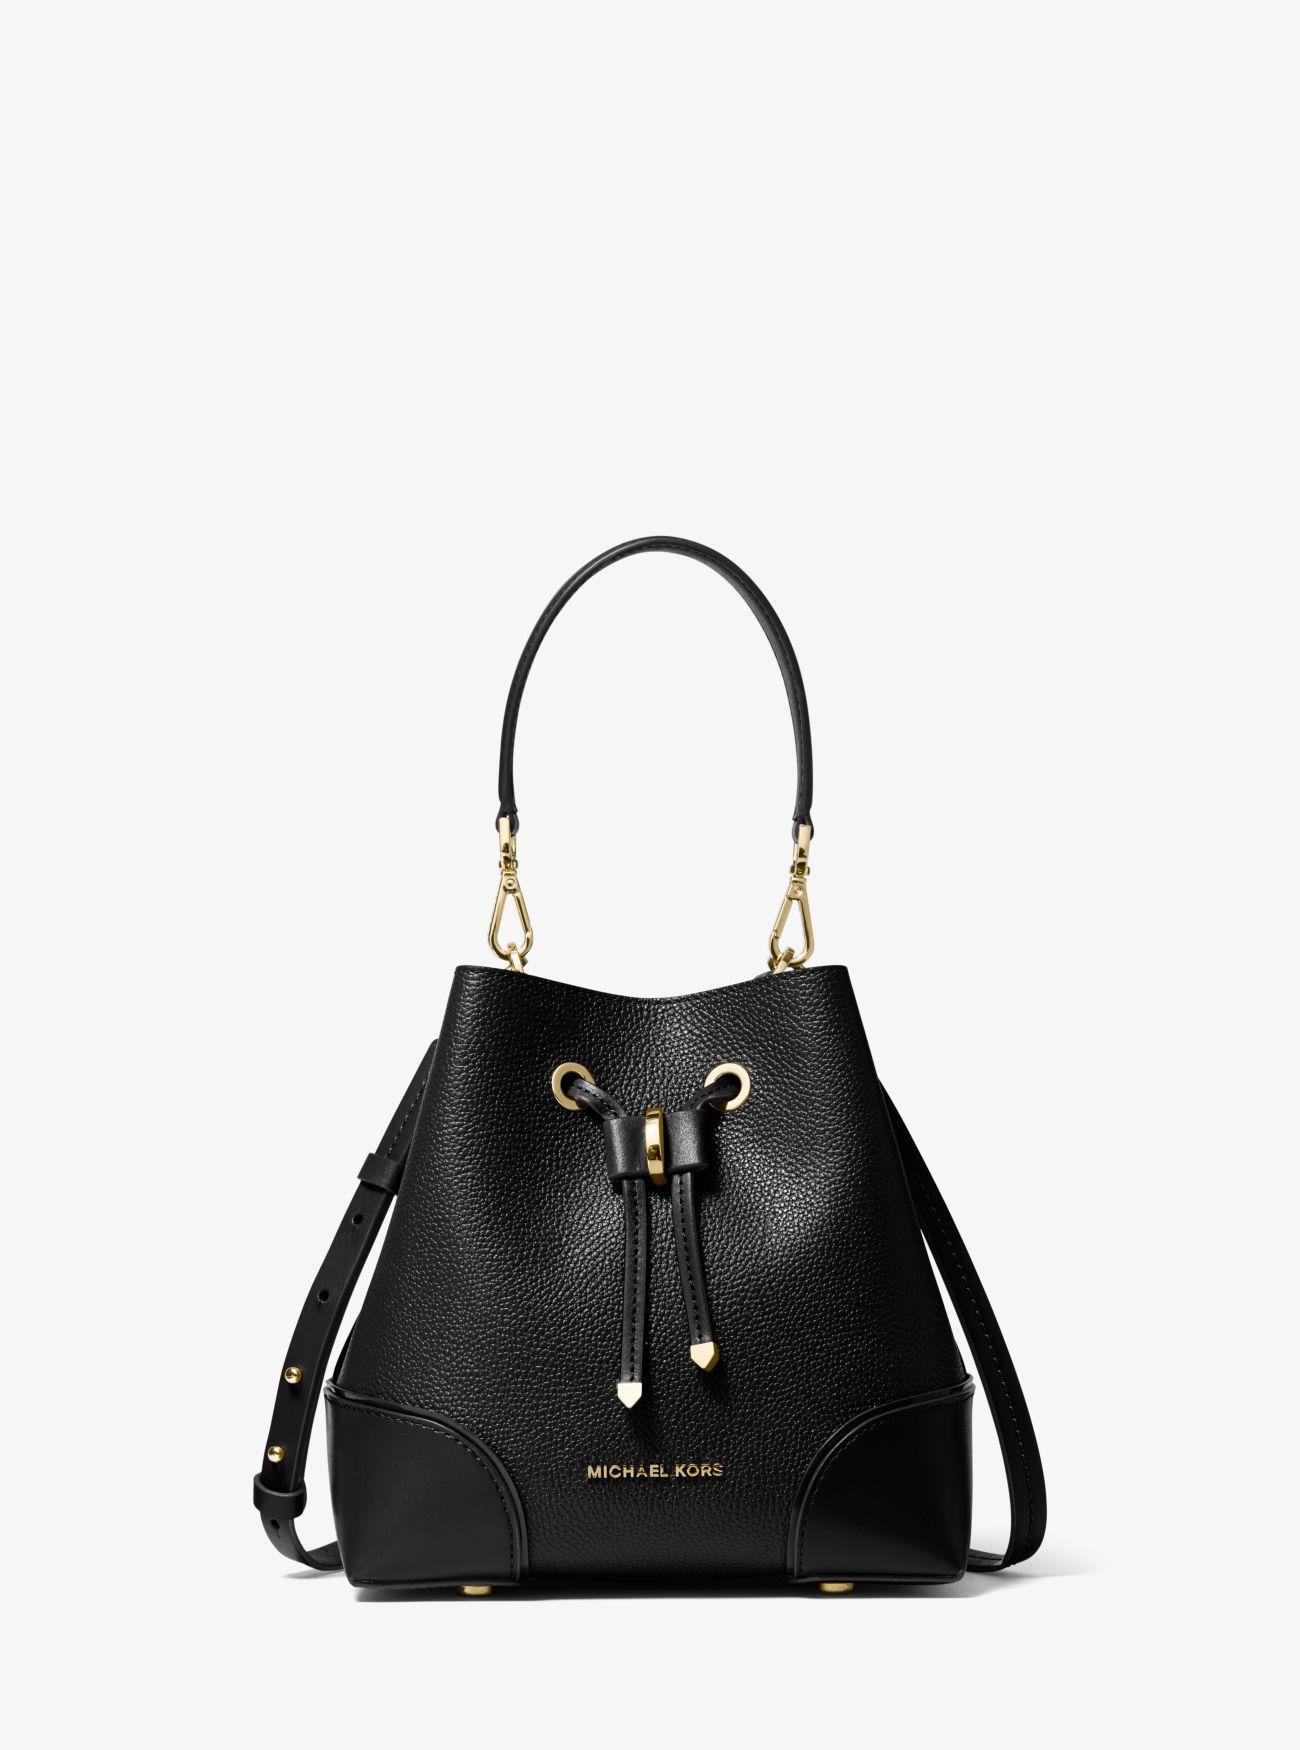 Small Black Pebble Leather Shoulder Bag | IUCN Water